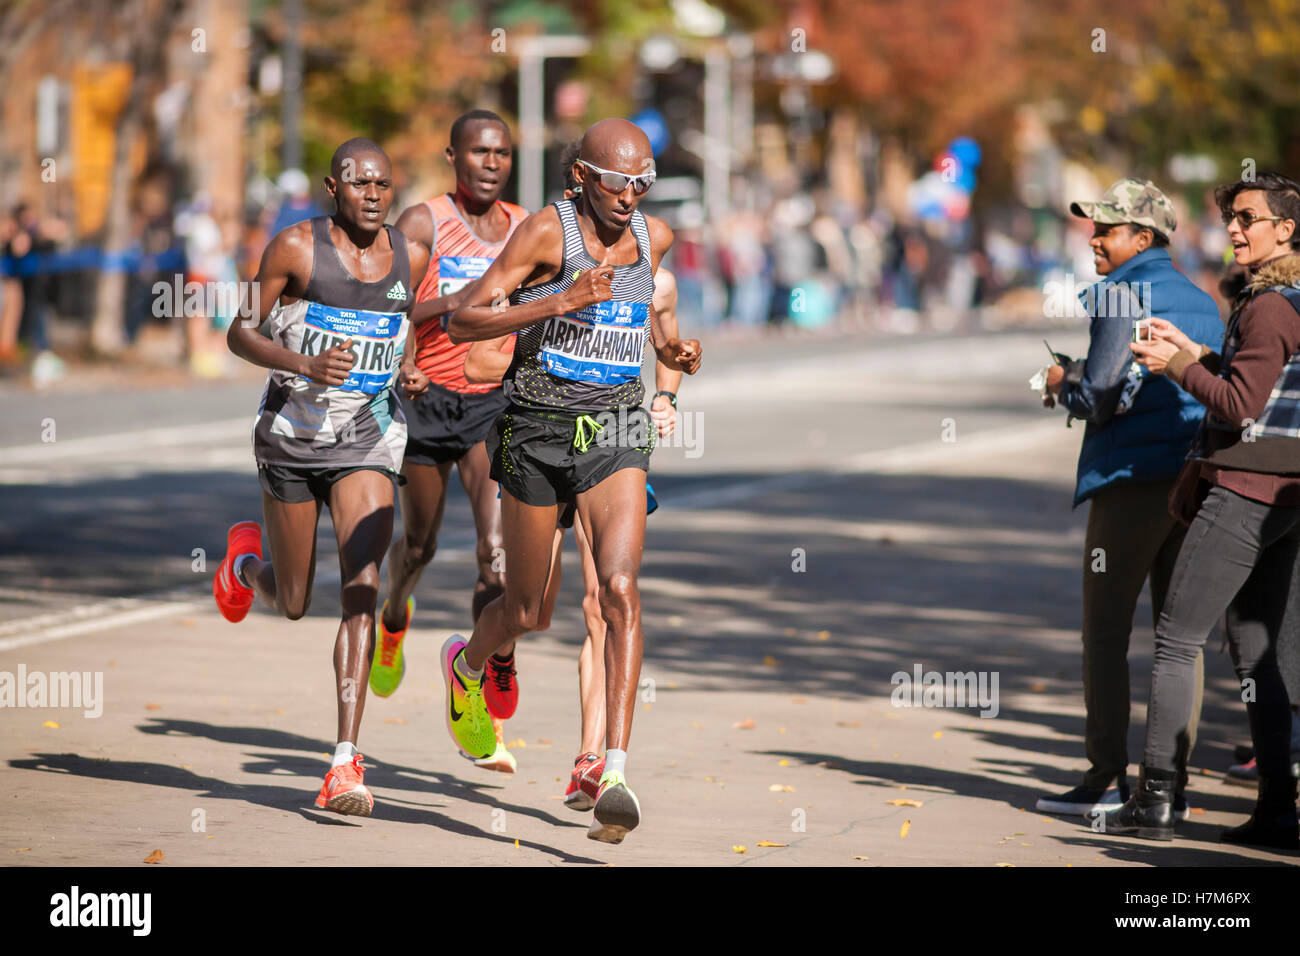 New York, USA. 06th Nov, 2016. Somali born American Abdi Abdirahman leads a pack of men as they pass through Harlem in New York near the 22 mile mark near Mount Morris Park on Sunday, November 6, 2016 in the 46th annual TCS New York City Marathon. Abdirahman finished third in the marathon at 2 hours 11 minutes 23 seconds. ( © Richard B. Levine) Credit:  Richard Levine/Alamy Live News Stock Photo